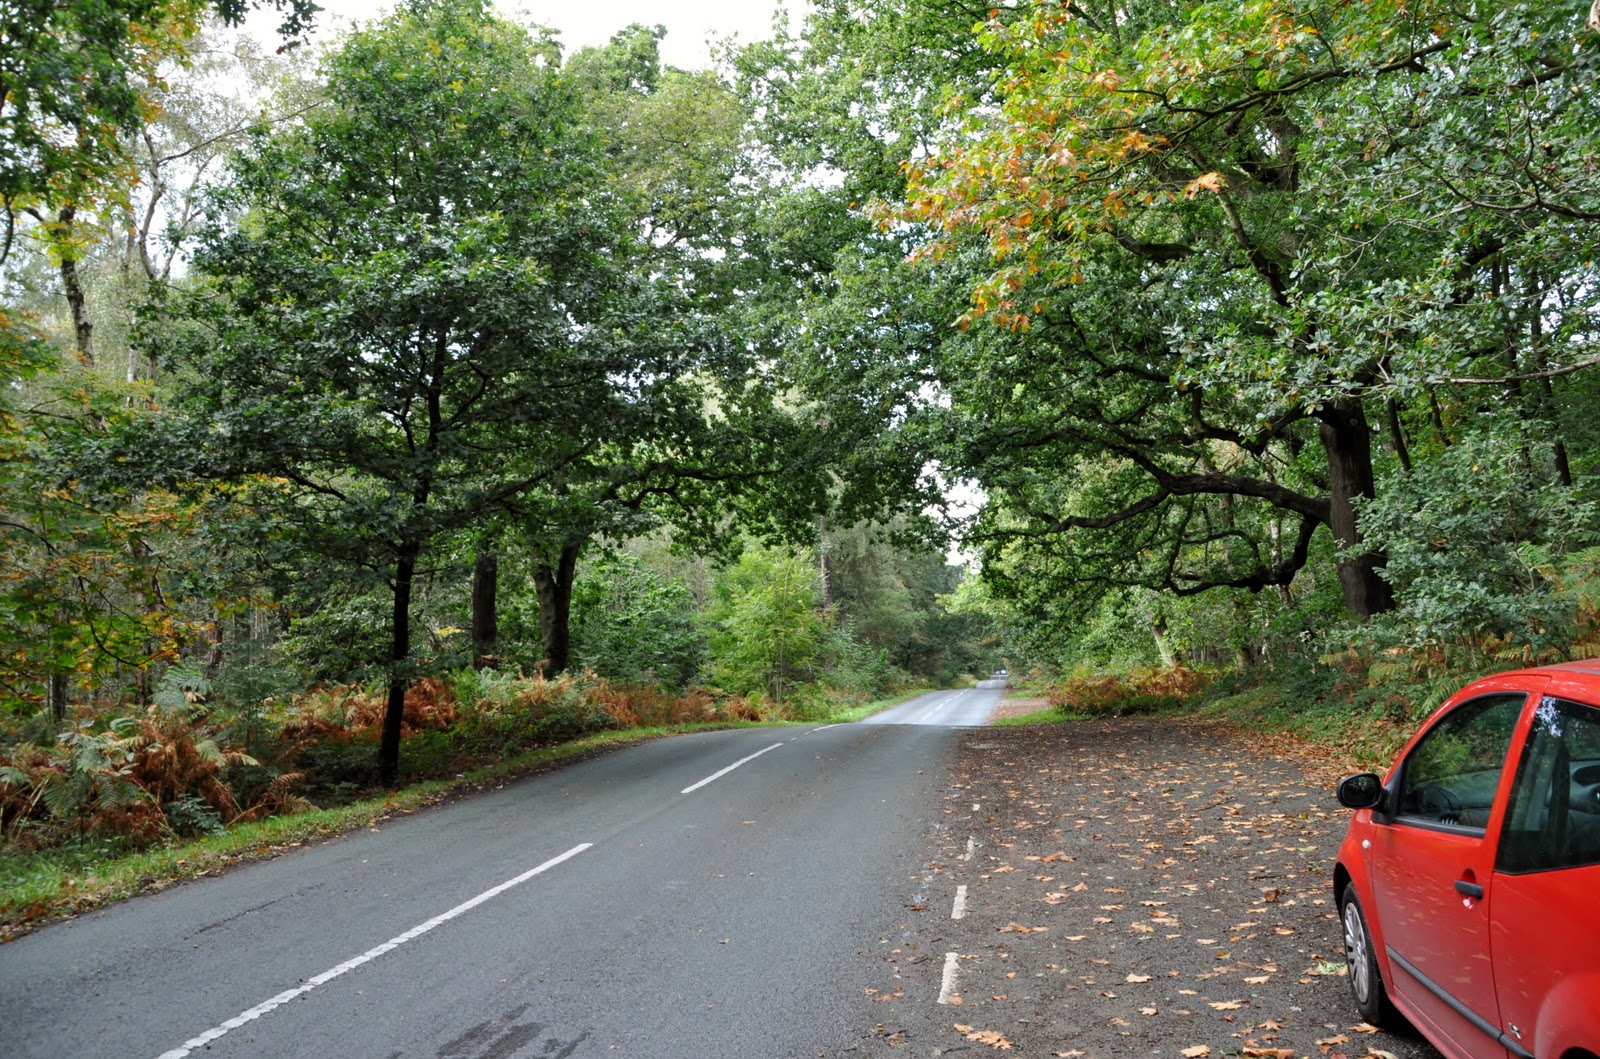 Download this Delamere Forest Autumn picture